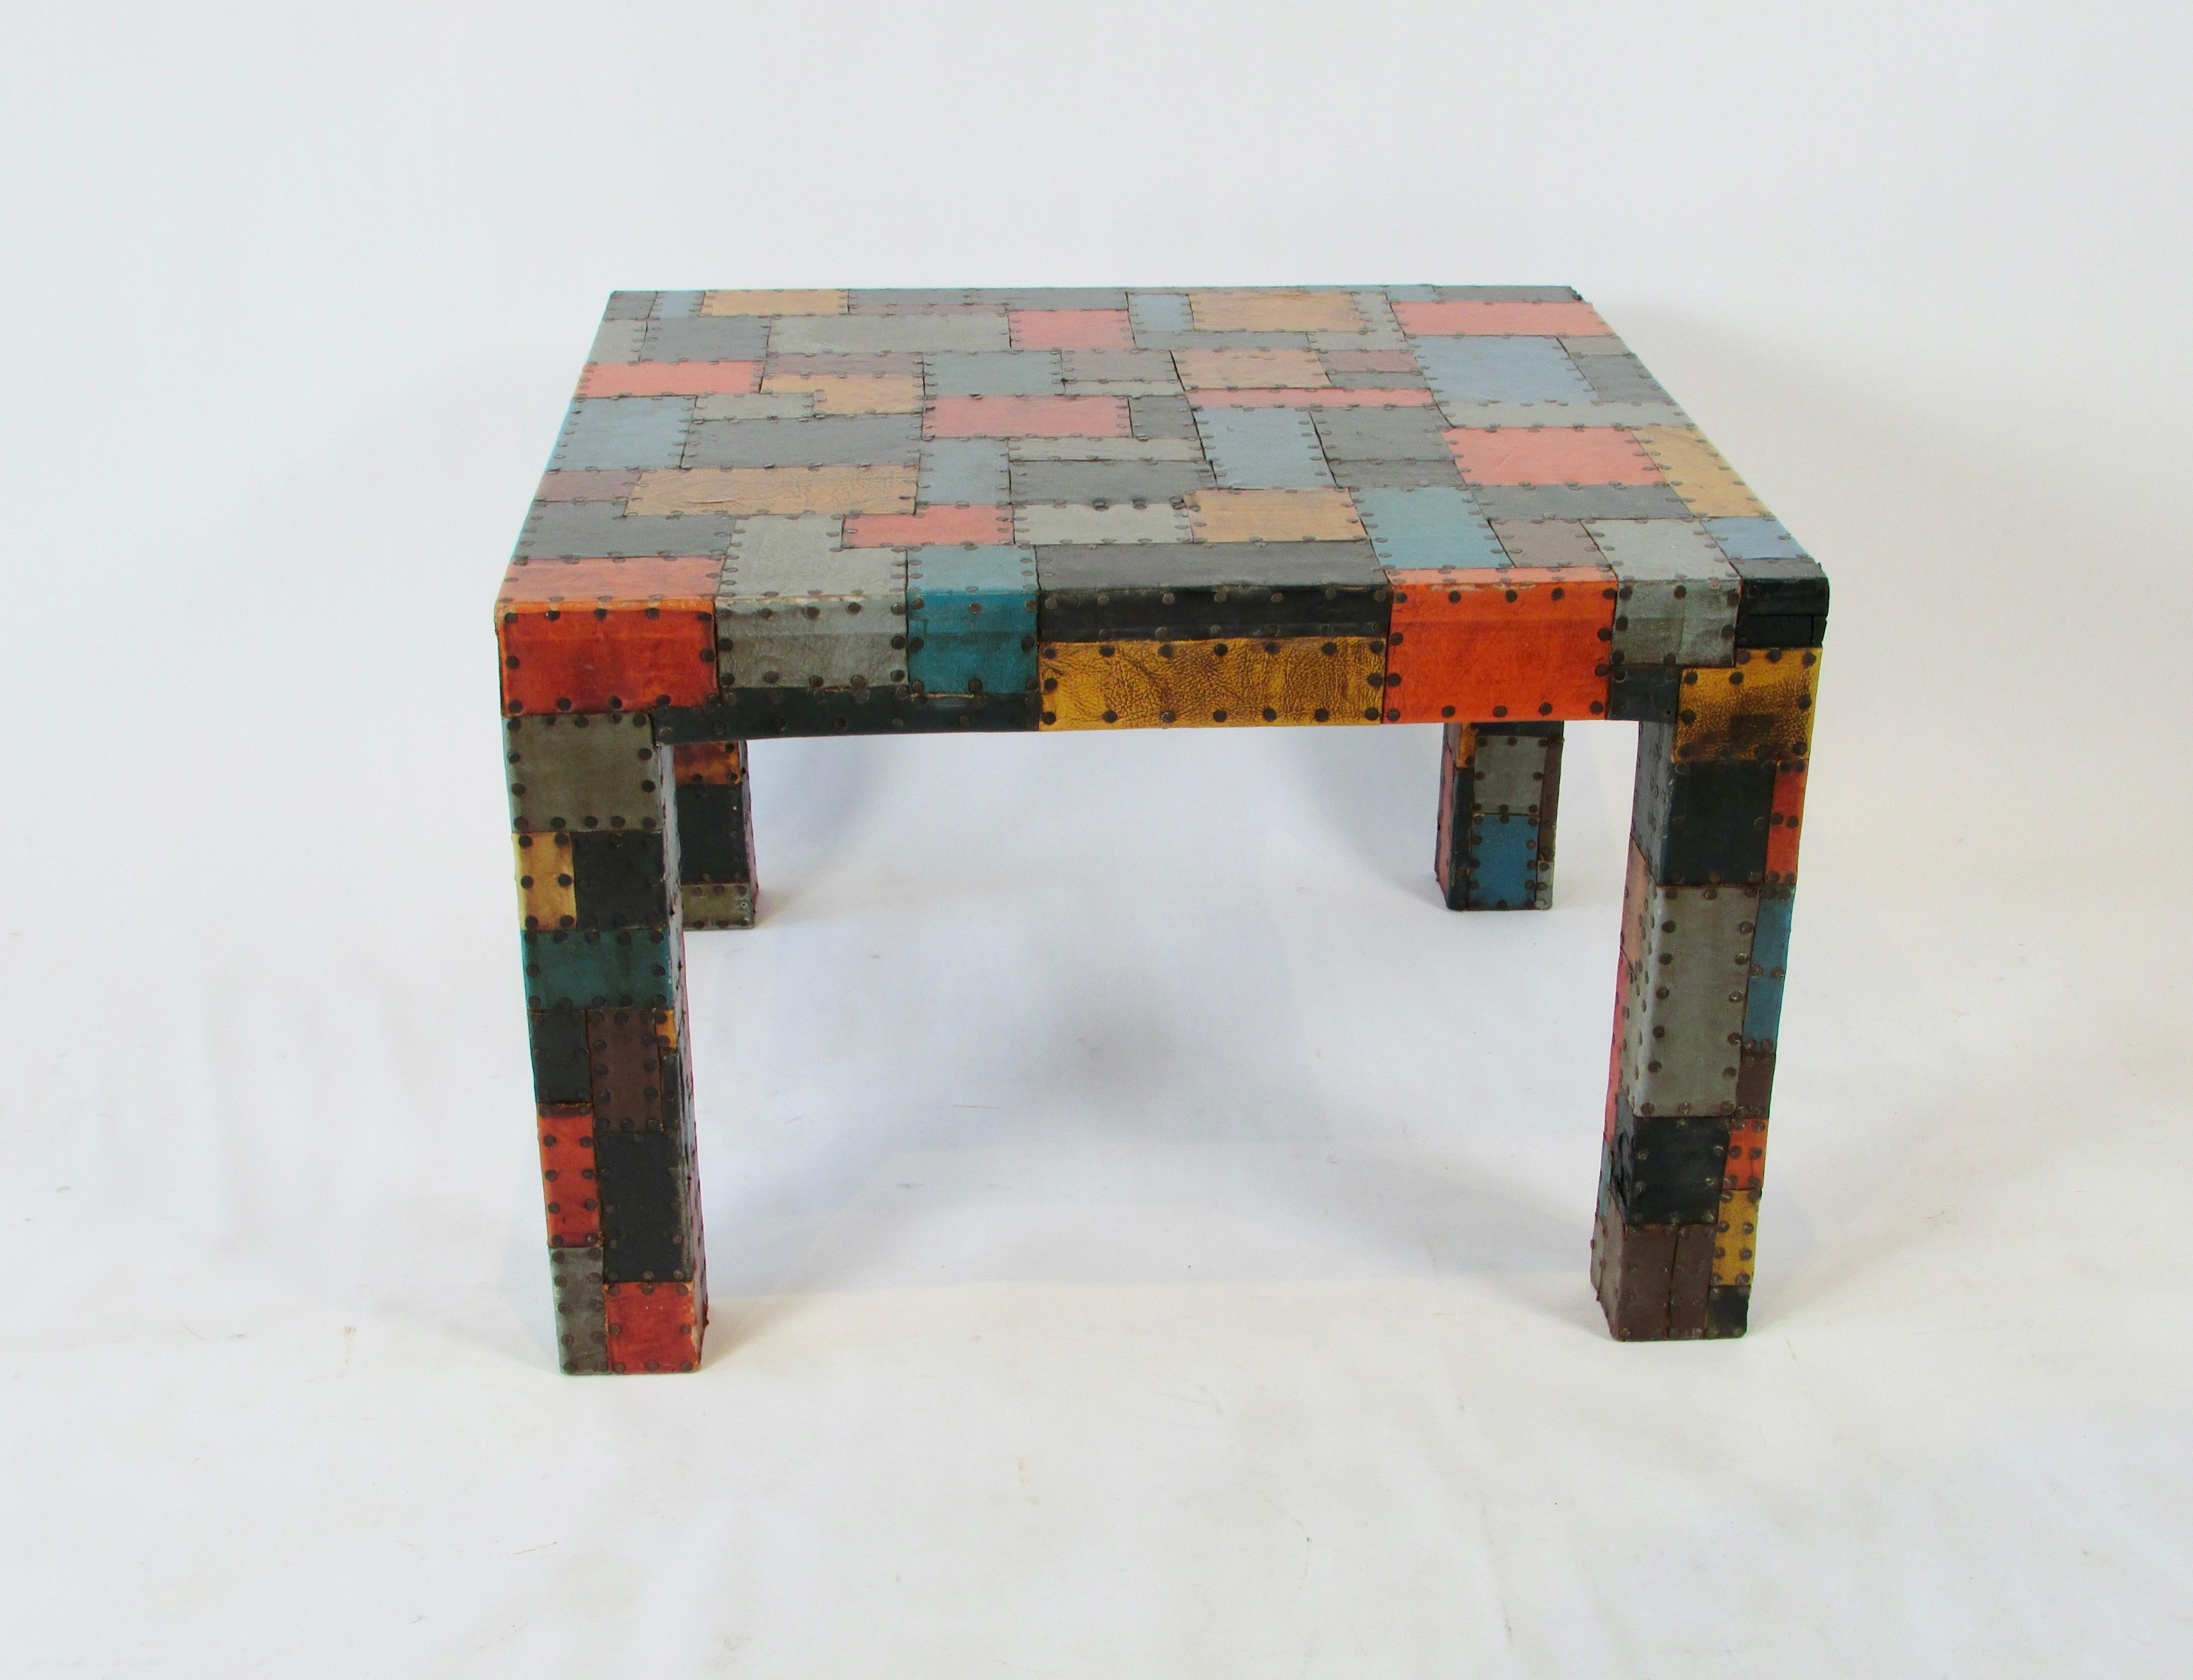 Nicely executed folk art parsons style table. Covered in leather square patches of varying size and color in geometric design. Fine scale and nicely matched colors. Each piece hammered to wooden table structure.